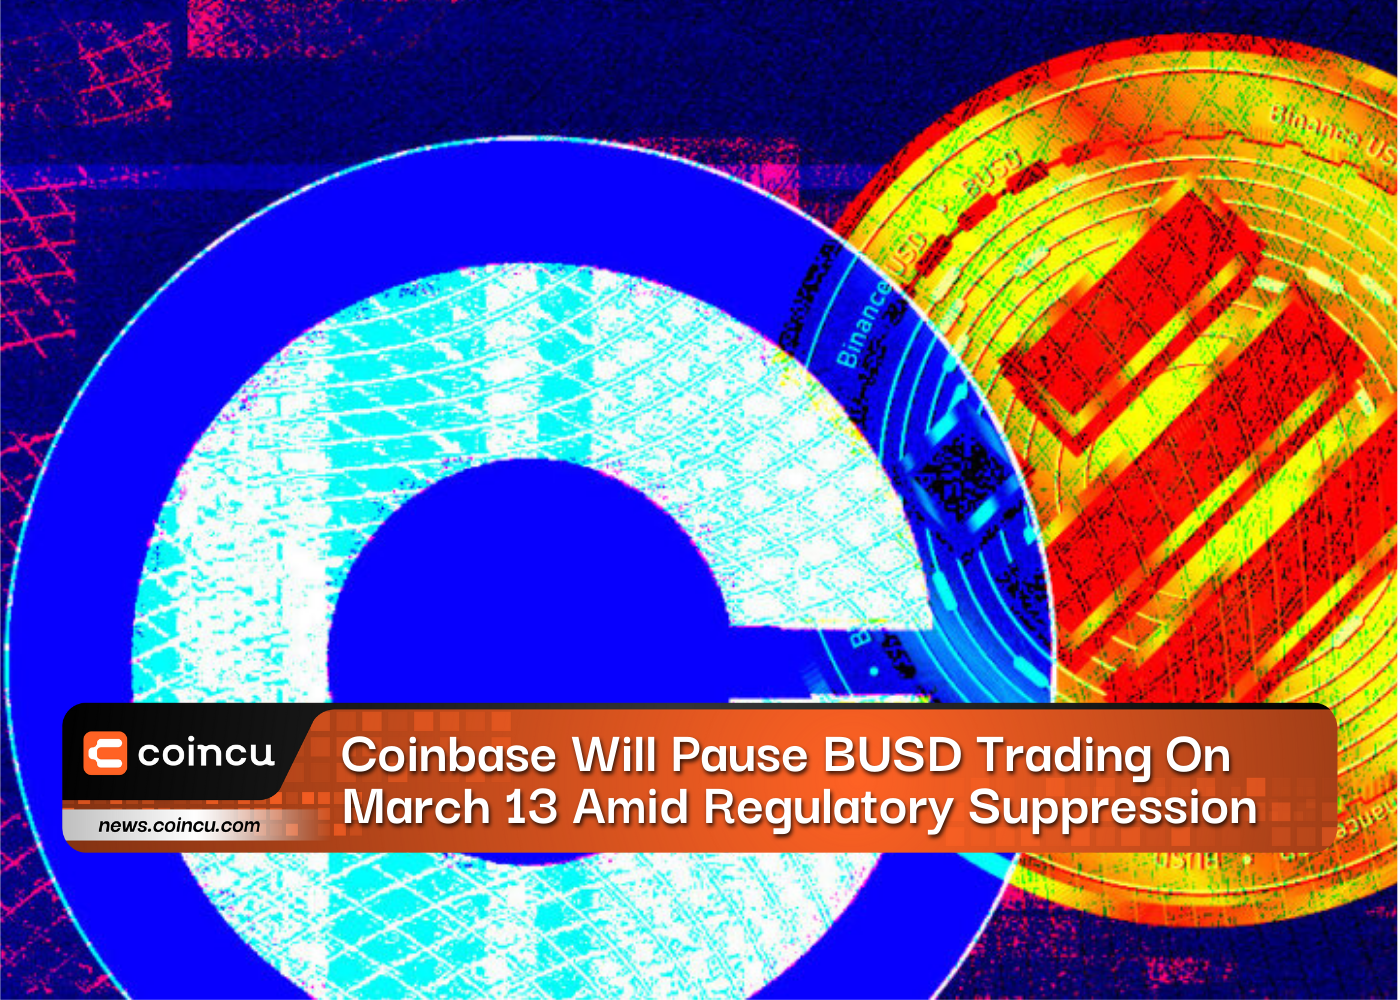 Coinbase Will Pause BUSD Trading On March 13 Amid Regulatory Suppression